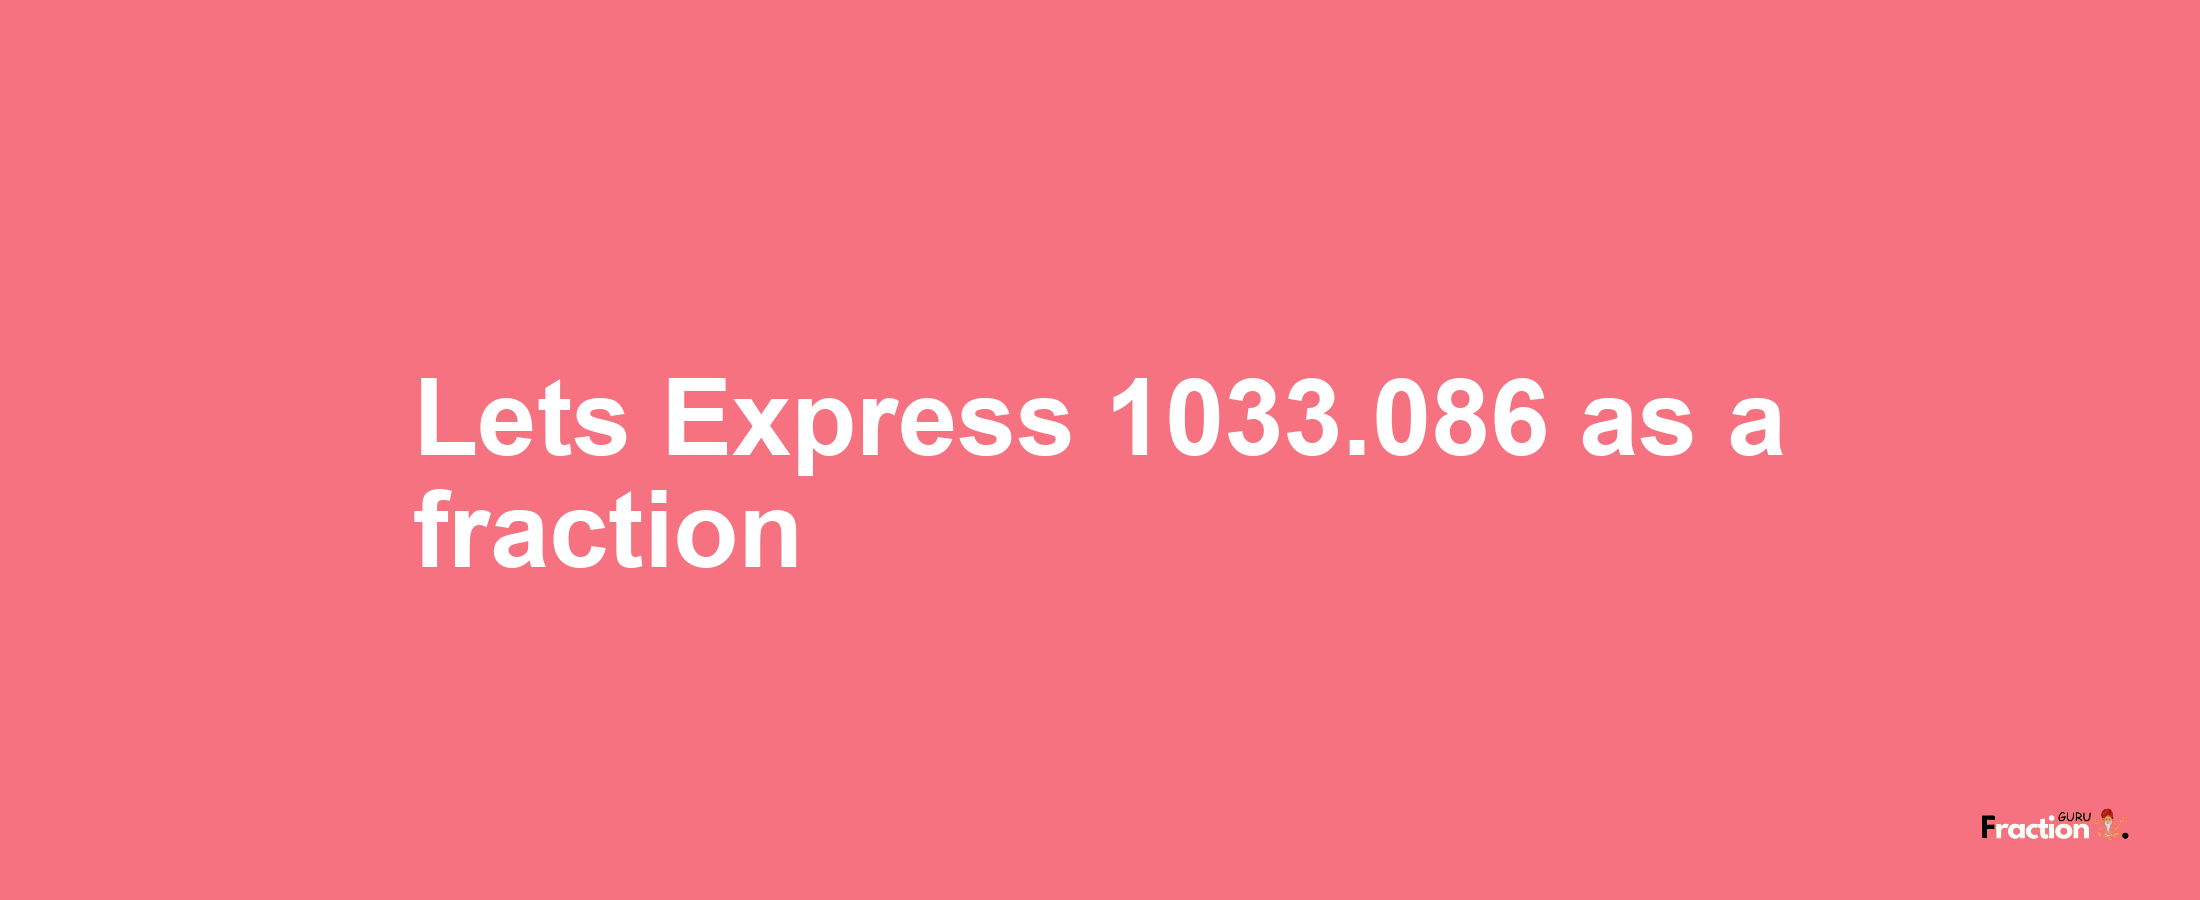 Lets Express 1033.086 as afraction